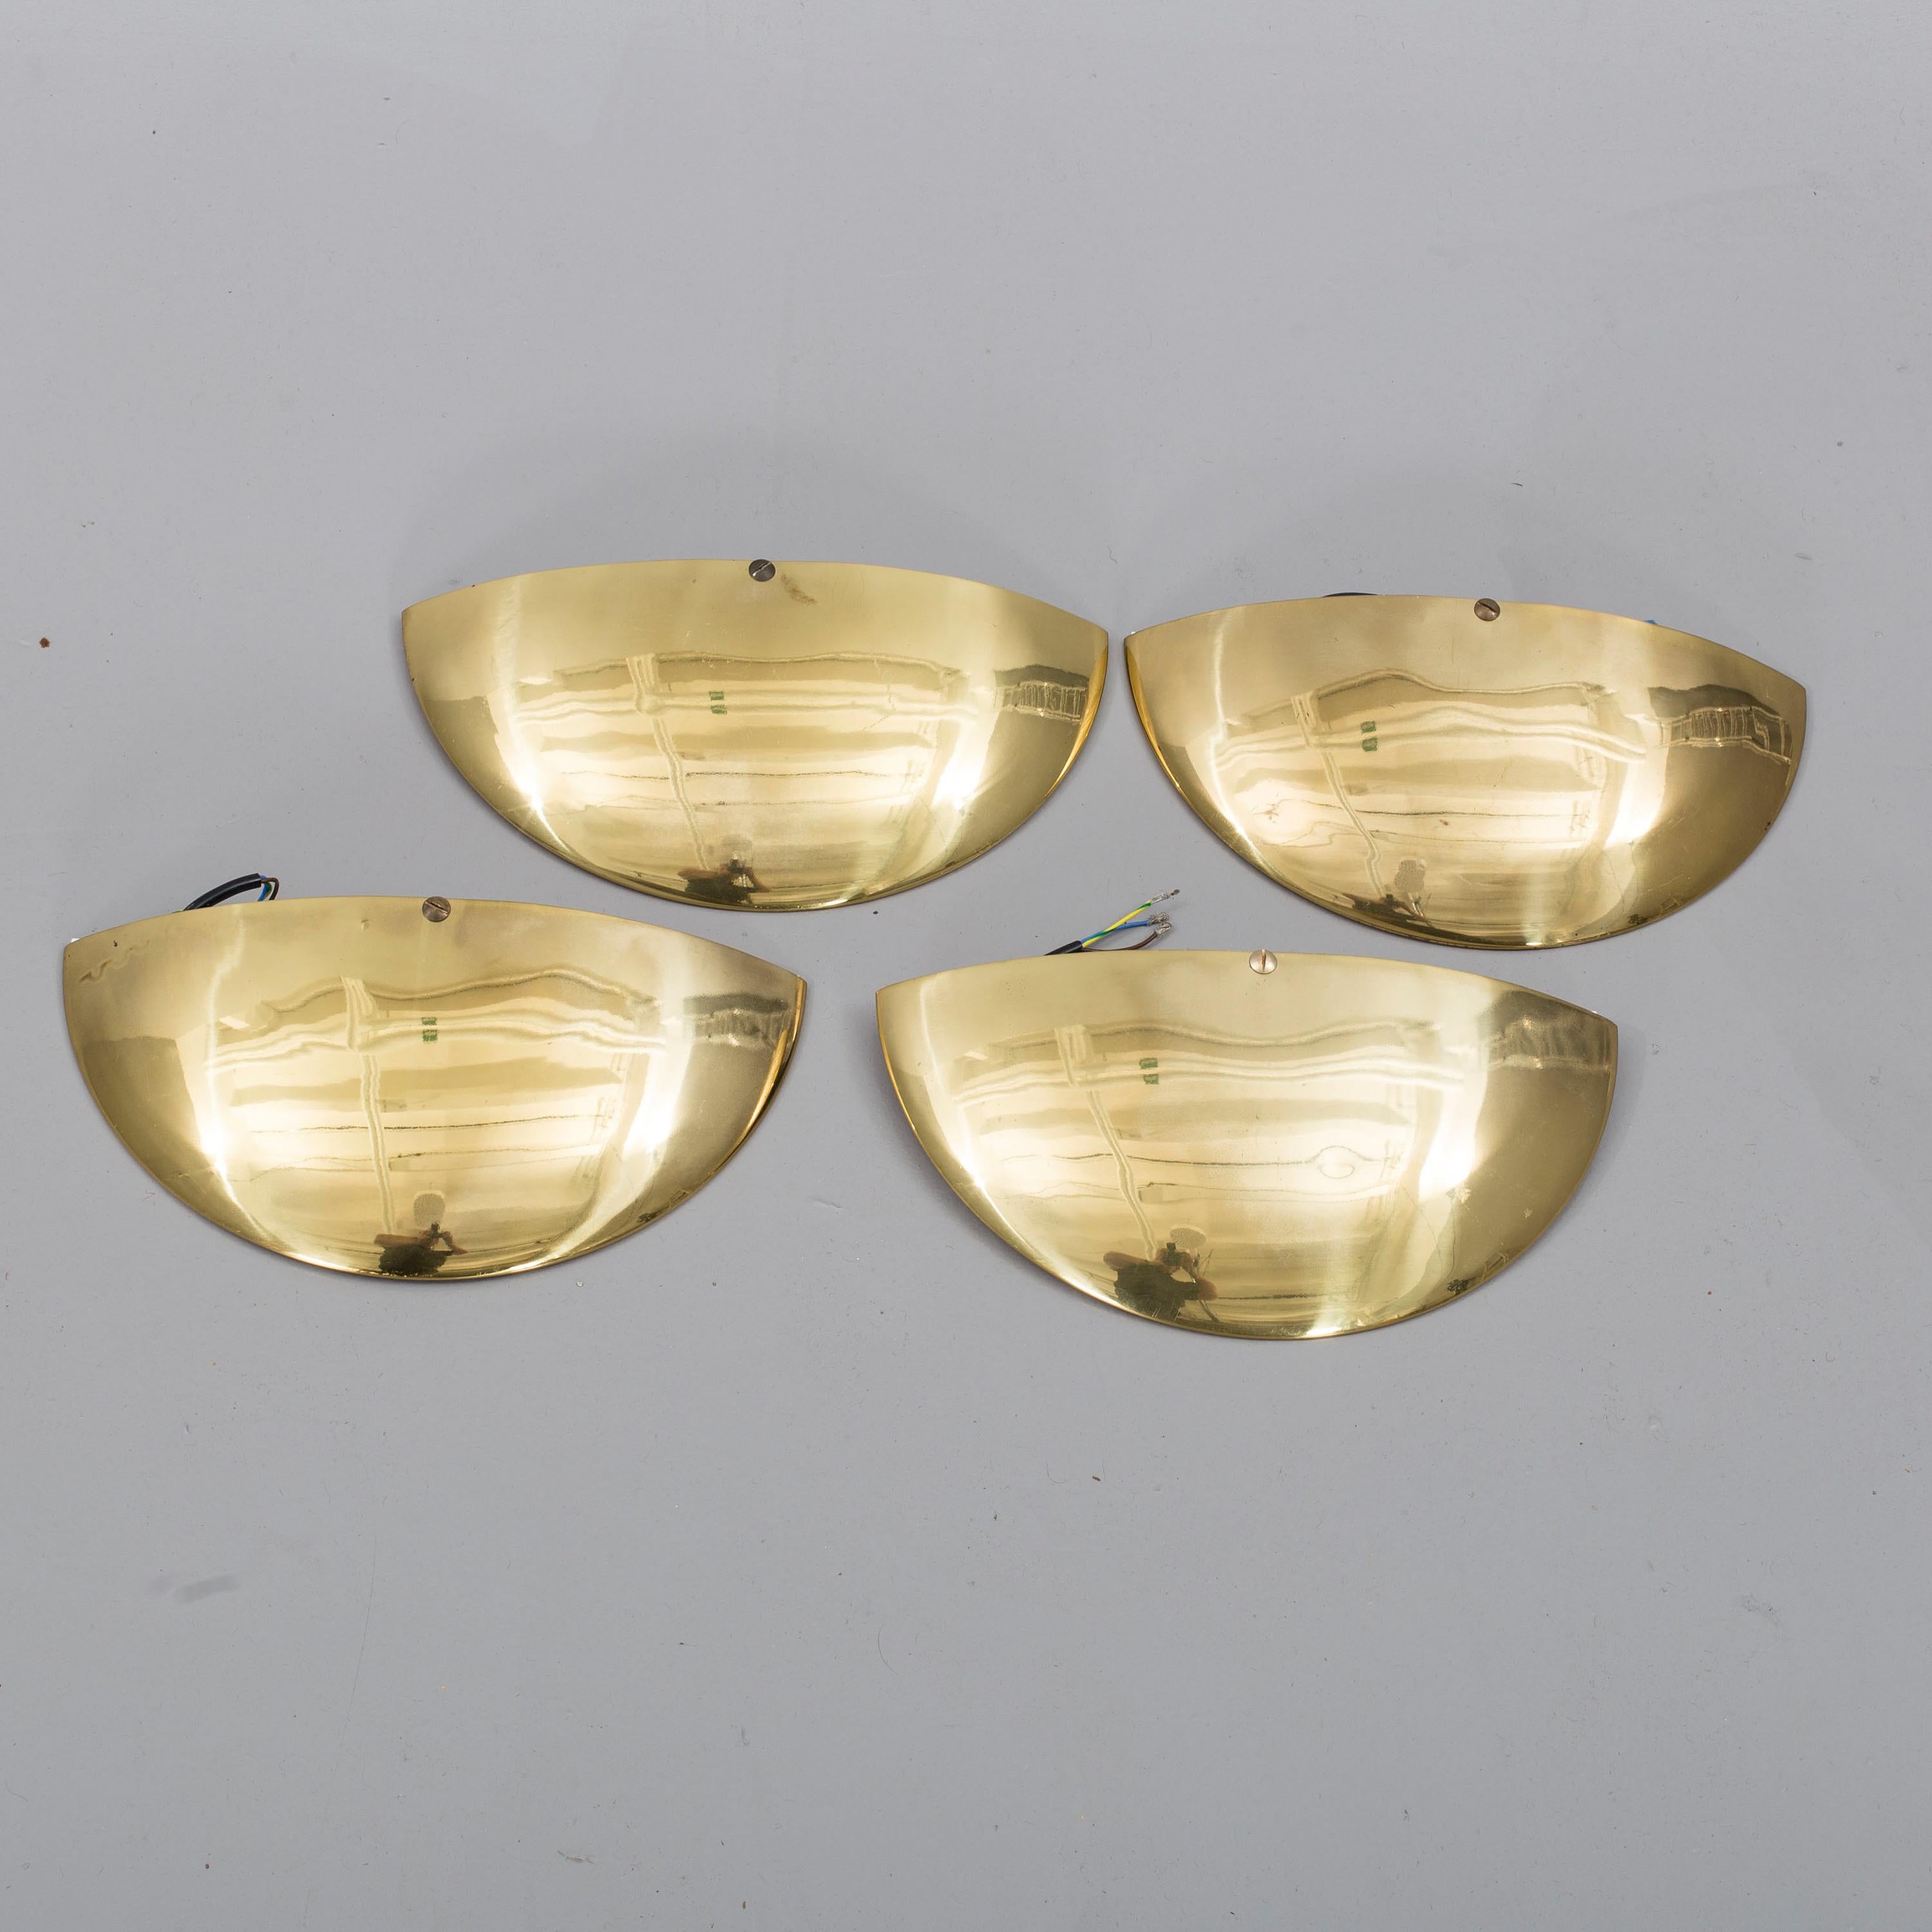 Solid brass wall sconces, made in mid-20th century. Two sets of four available.